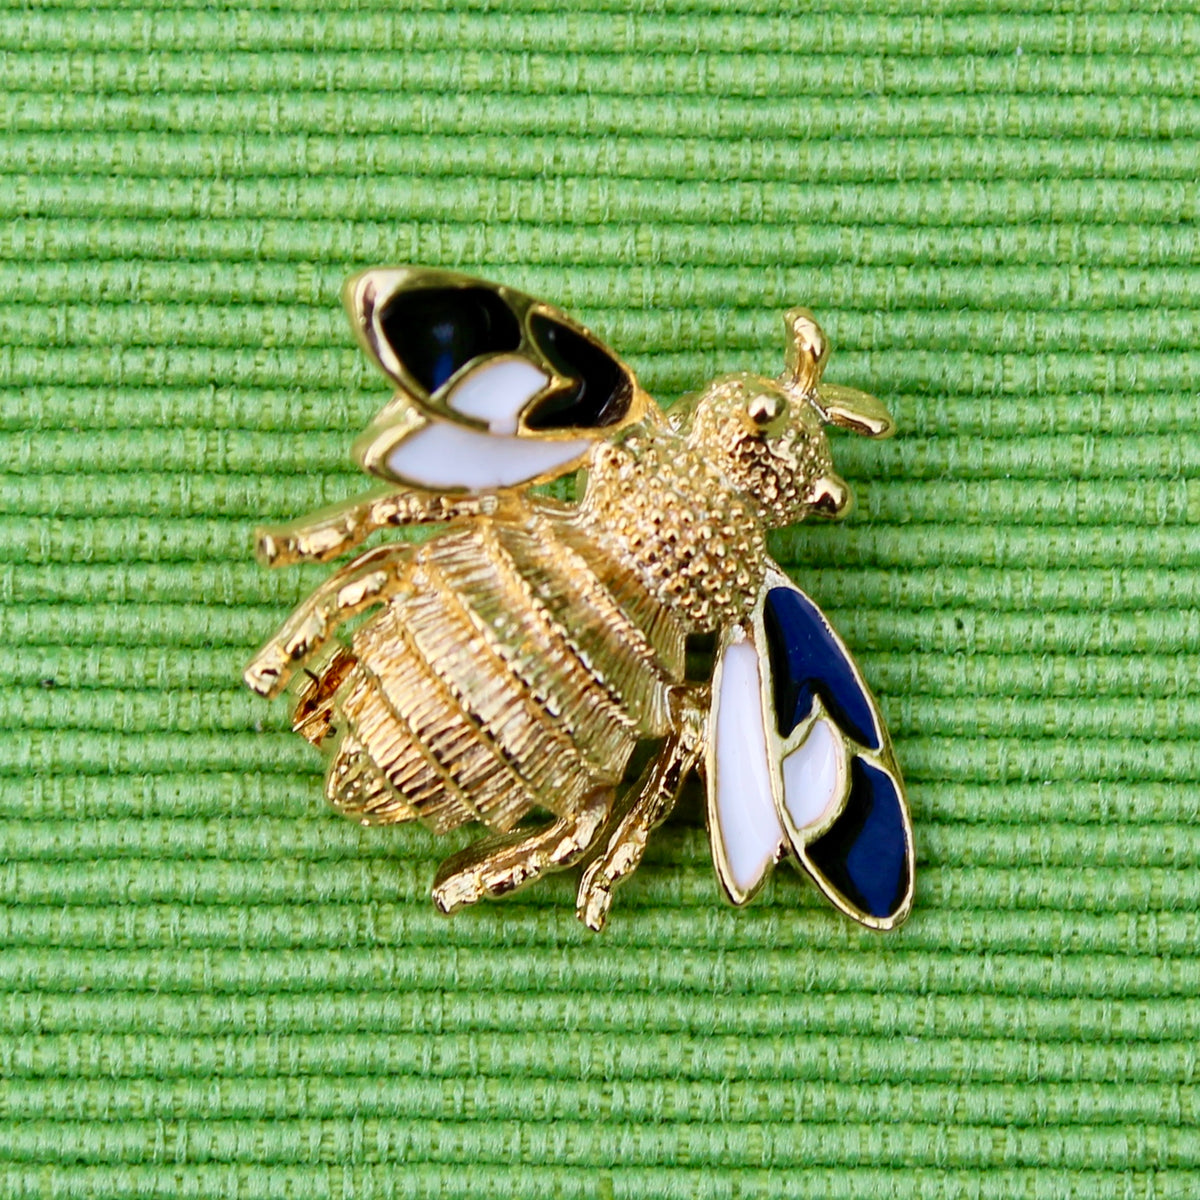 Medium Brass Fly Pin Insect Pin Insect Brooch Bug Pin 